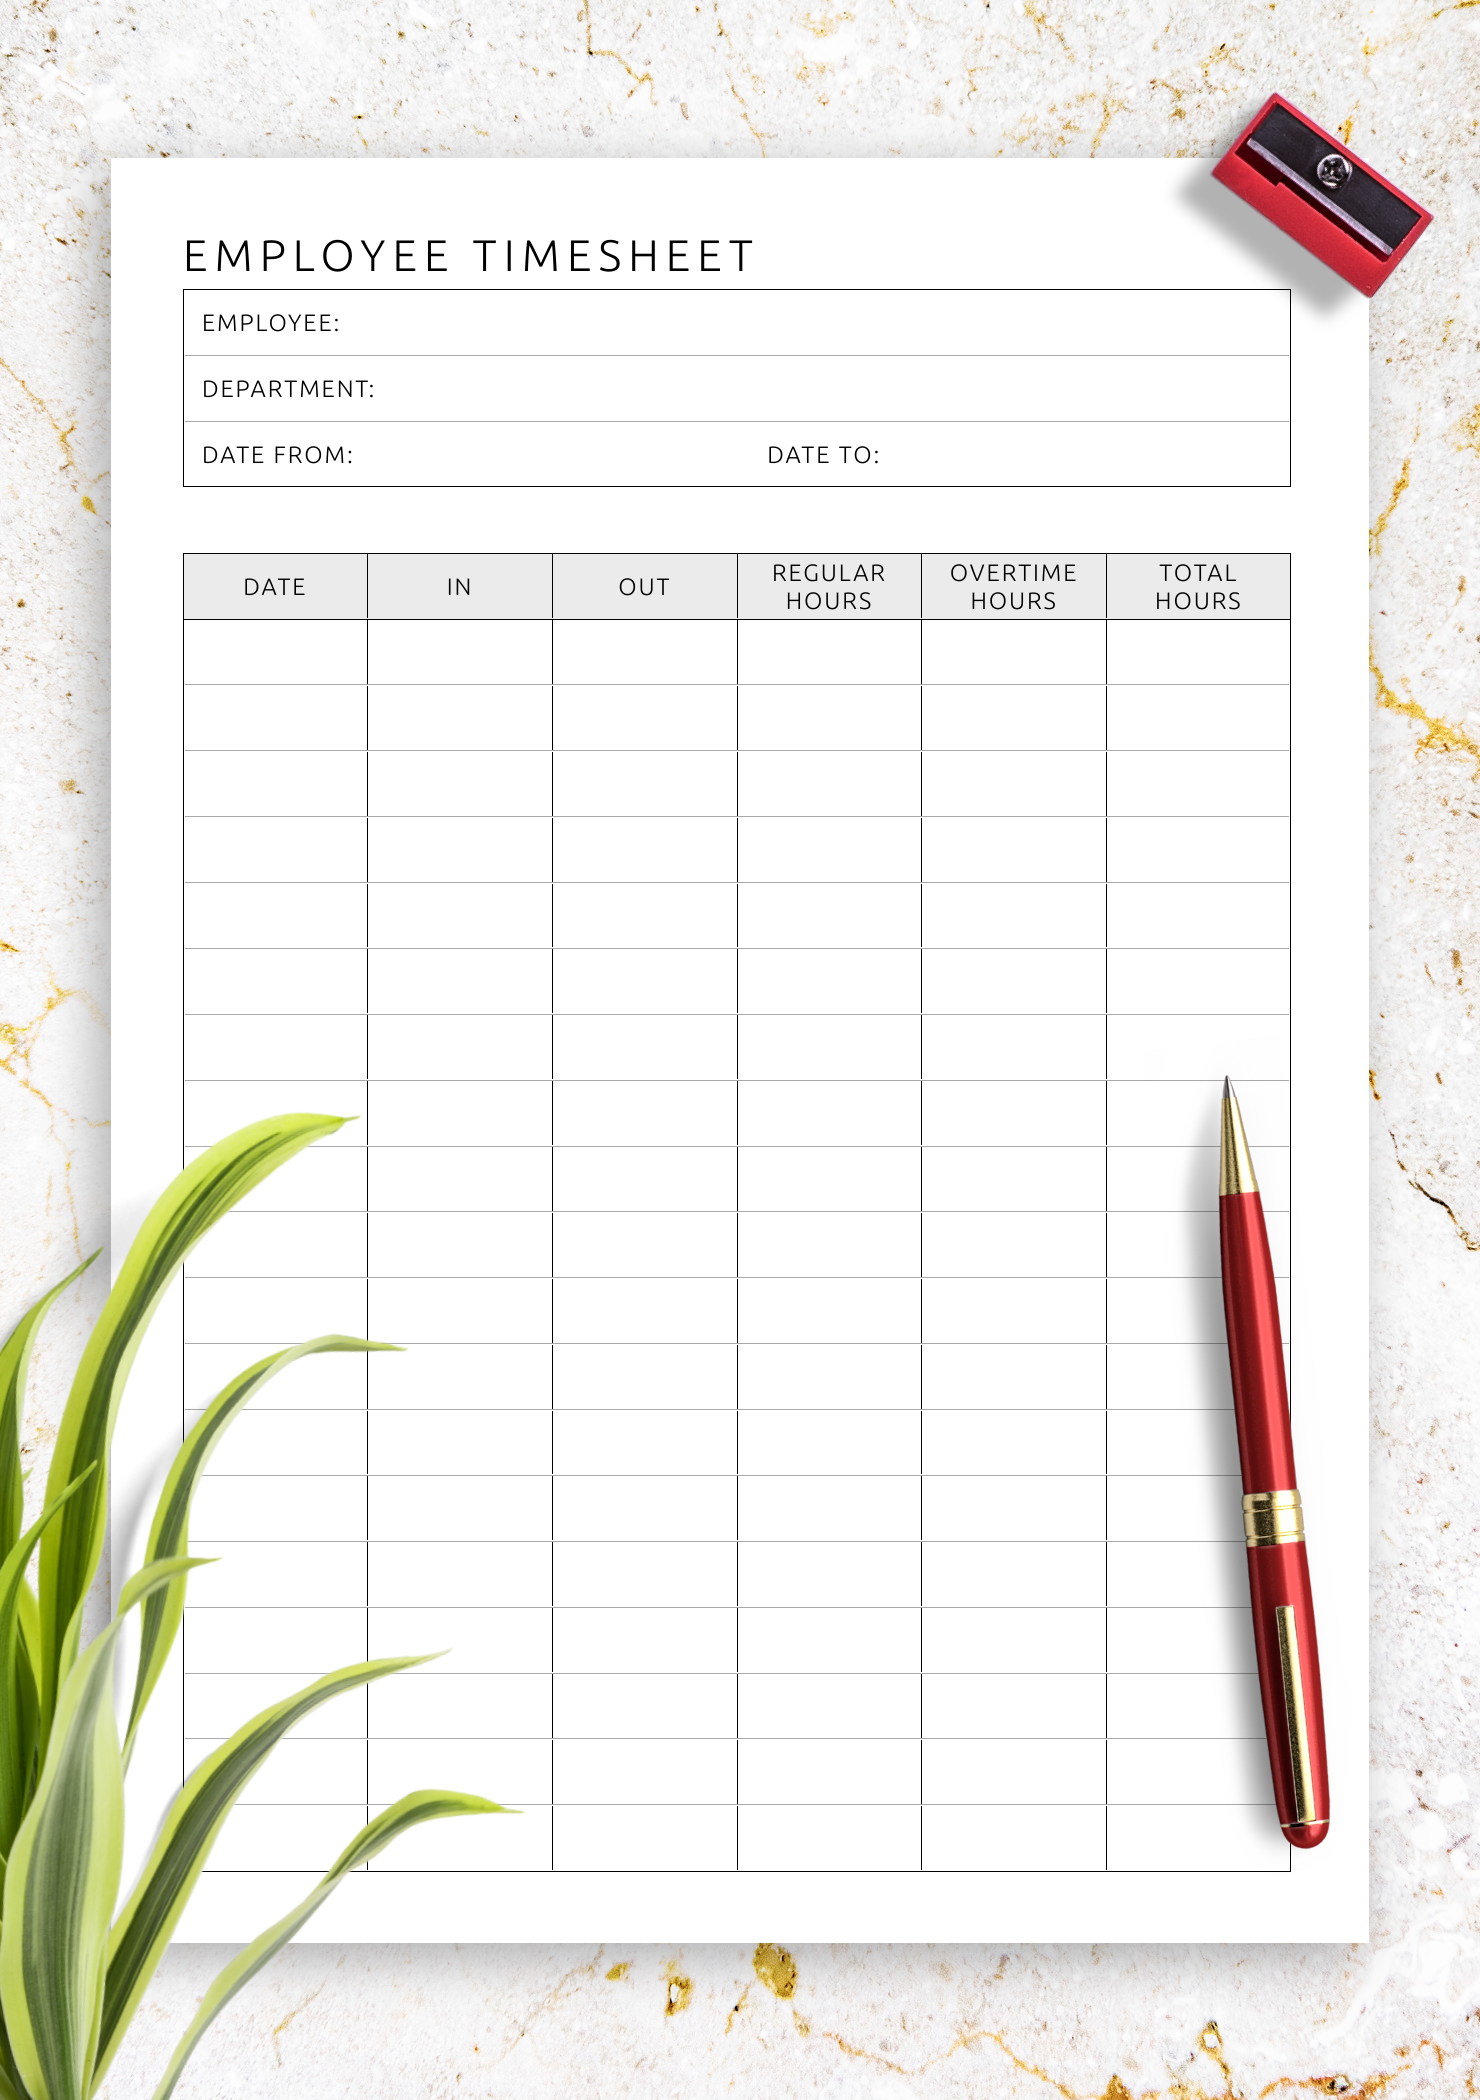 timesheet templates printable employee timesheet with signature in